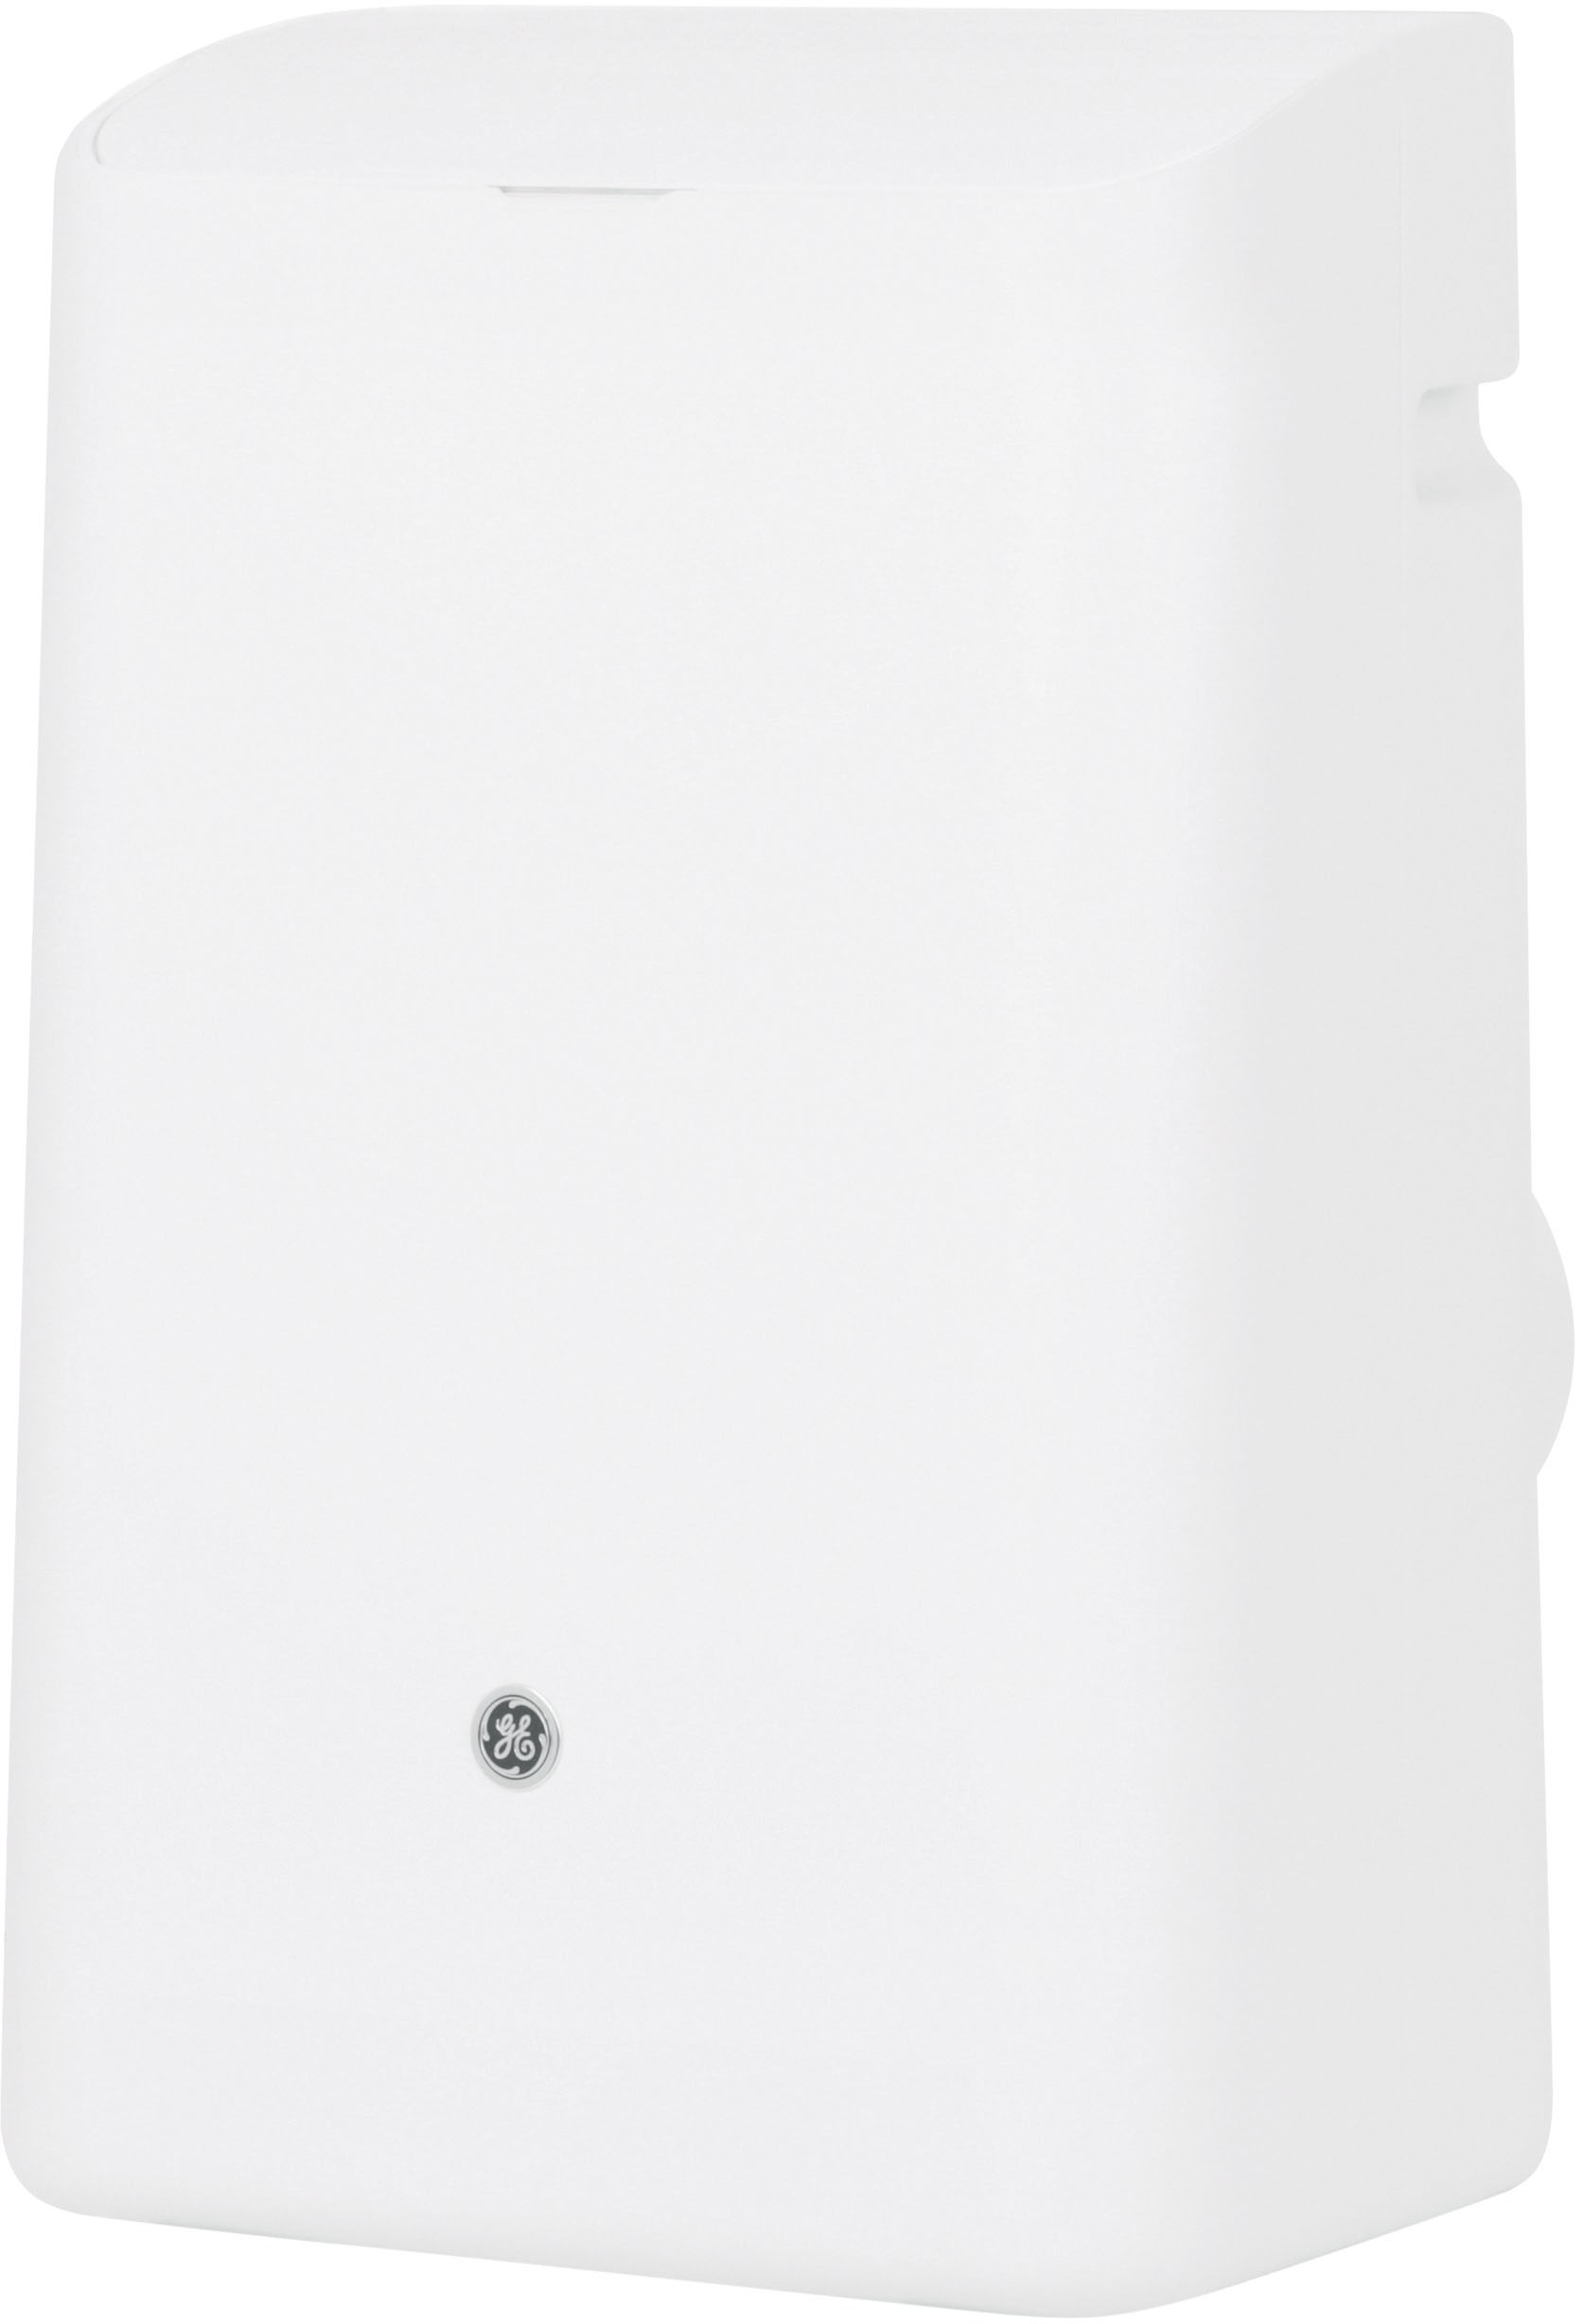 GE 450 Sq. Ft. 11,000 BTU Smart Portable Air Conditioner with WiFi